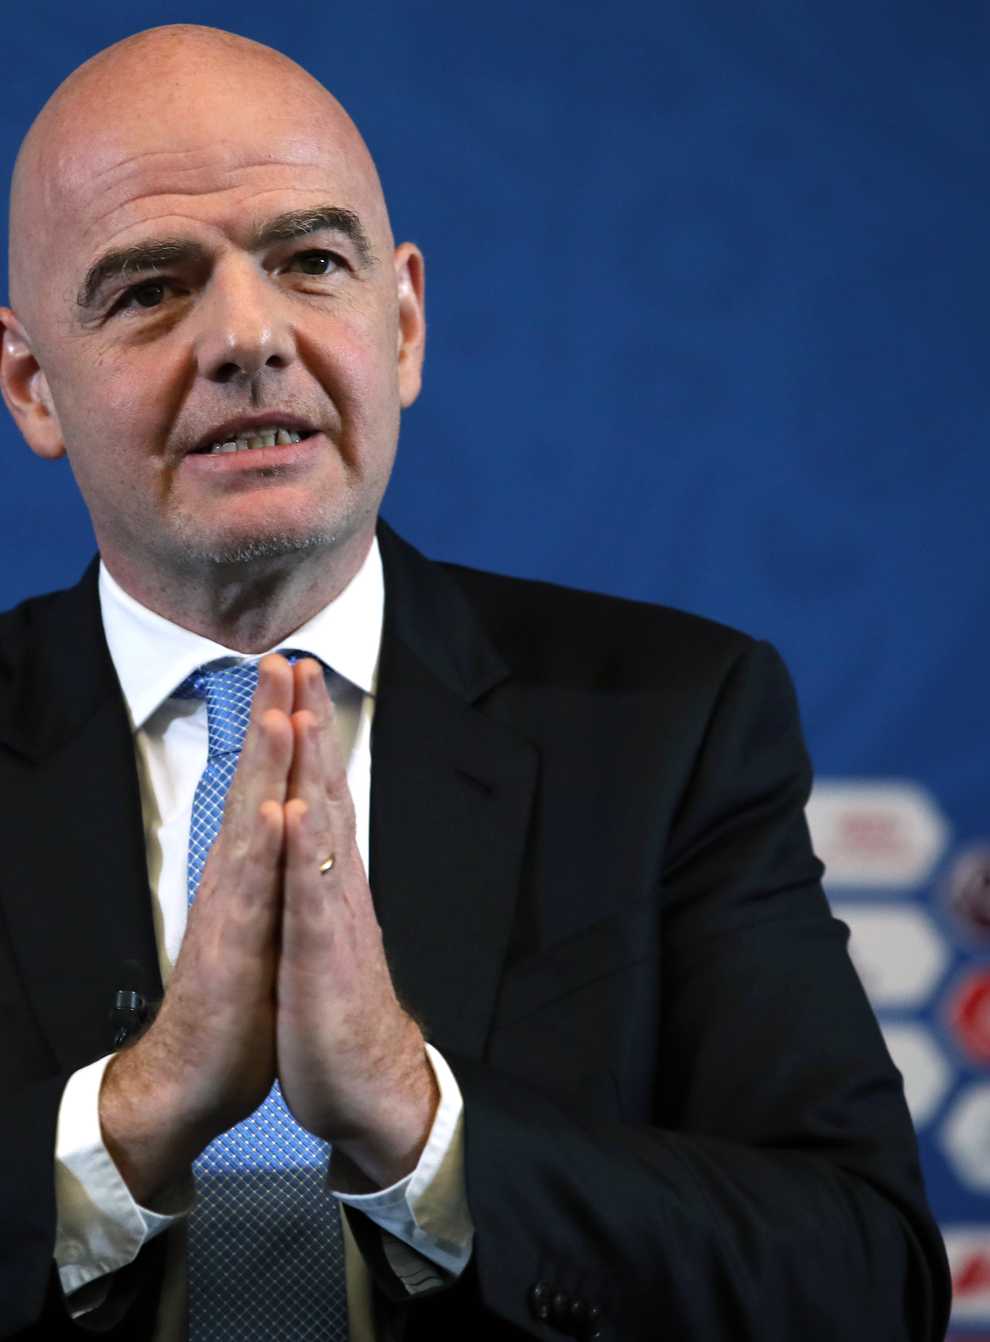 FIFA president Gianni Infantino has strongly rejected reports he gave instructions to female officials about how to greet a member of the Qatari delegation at the Club World Cup